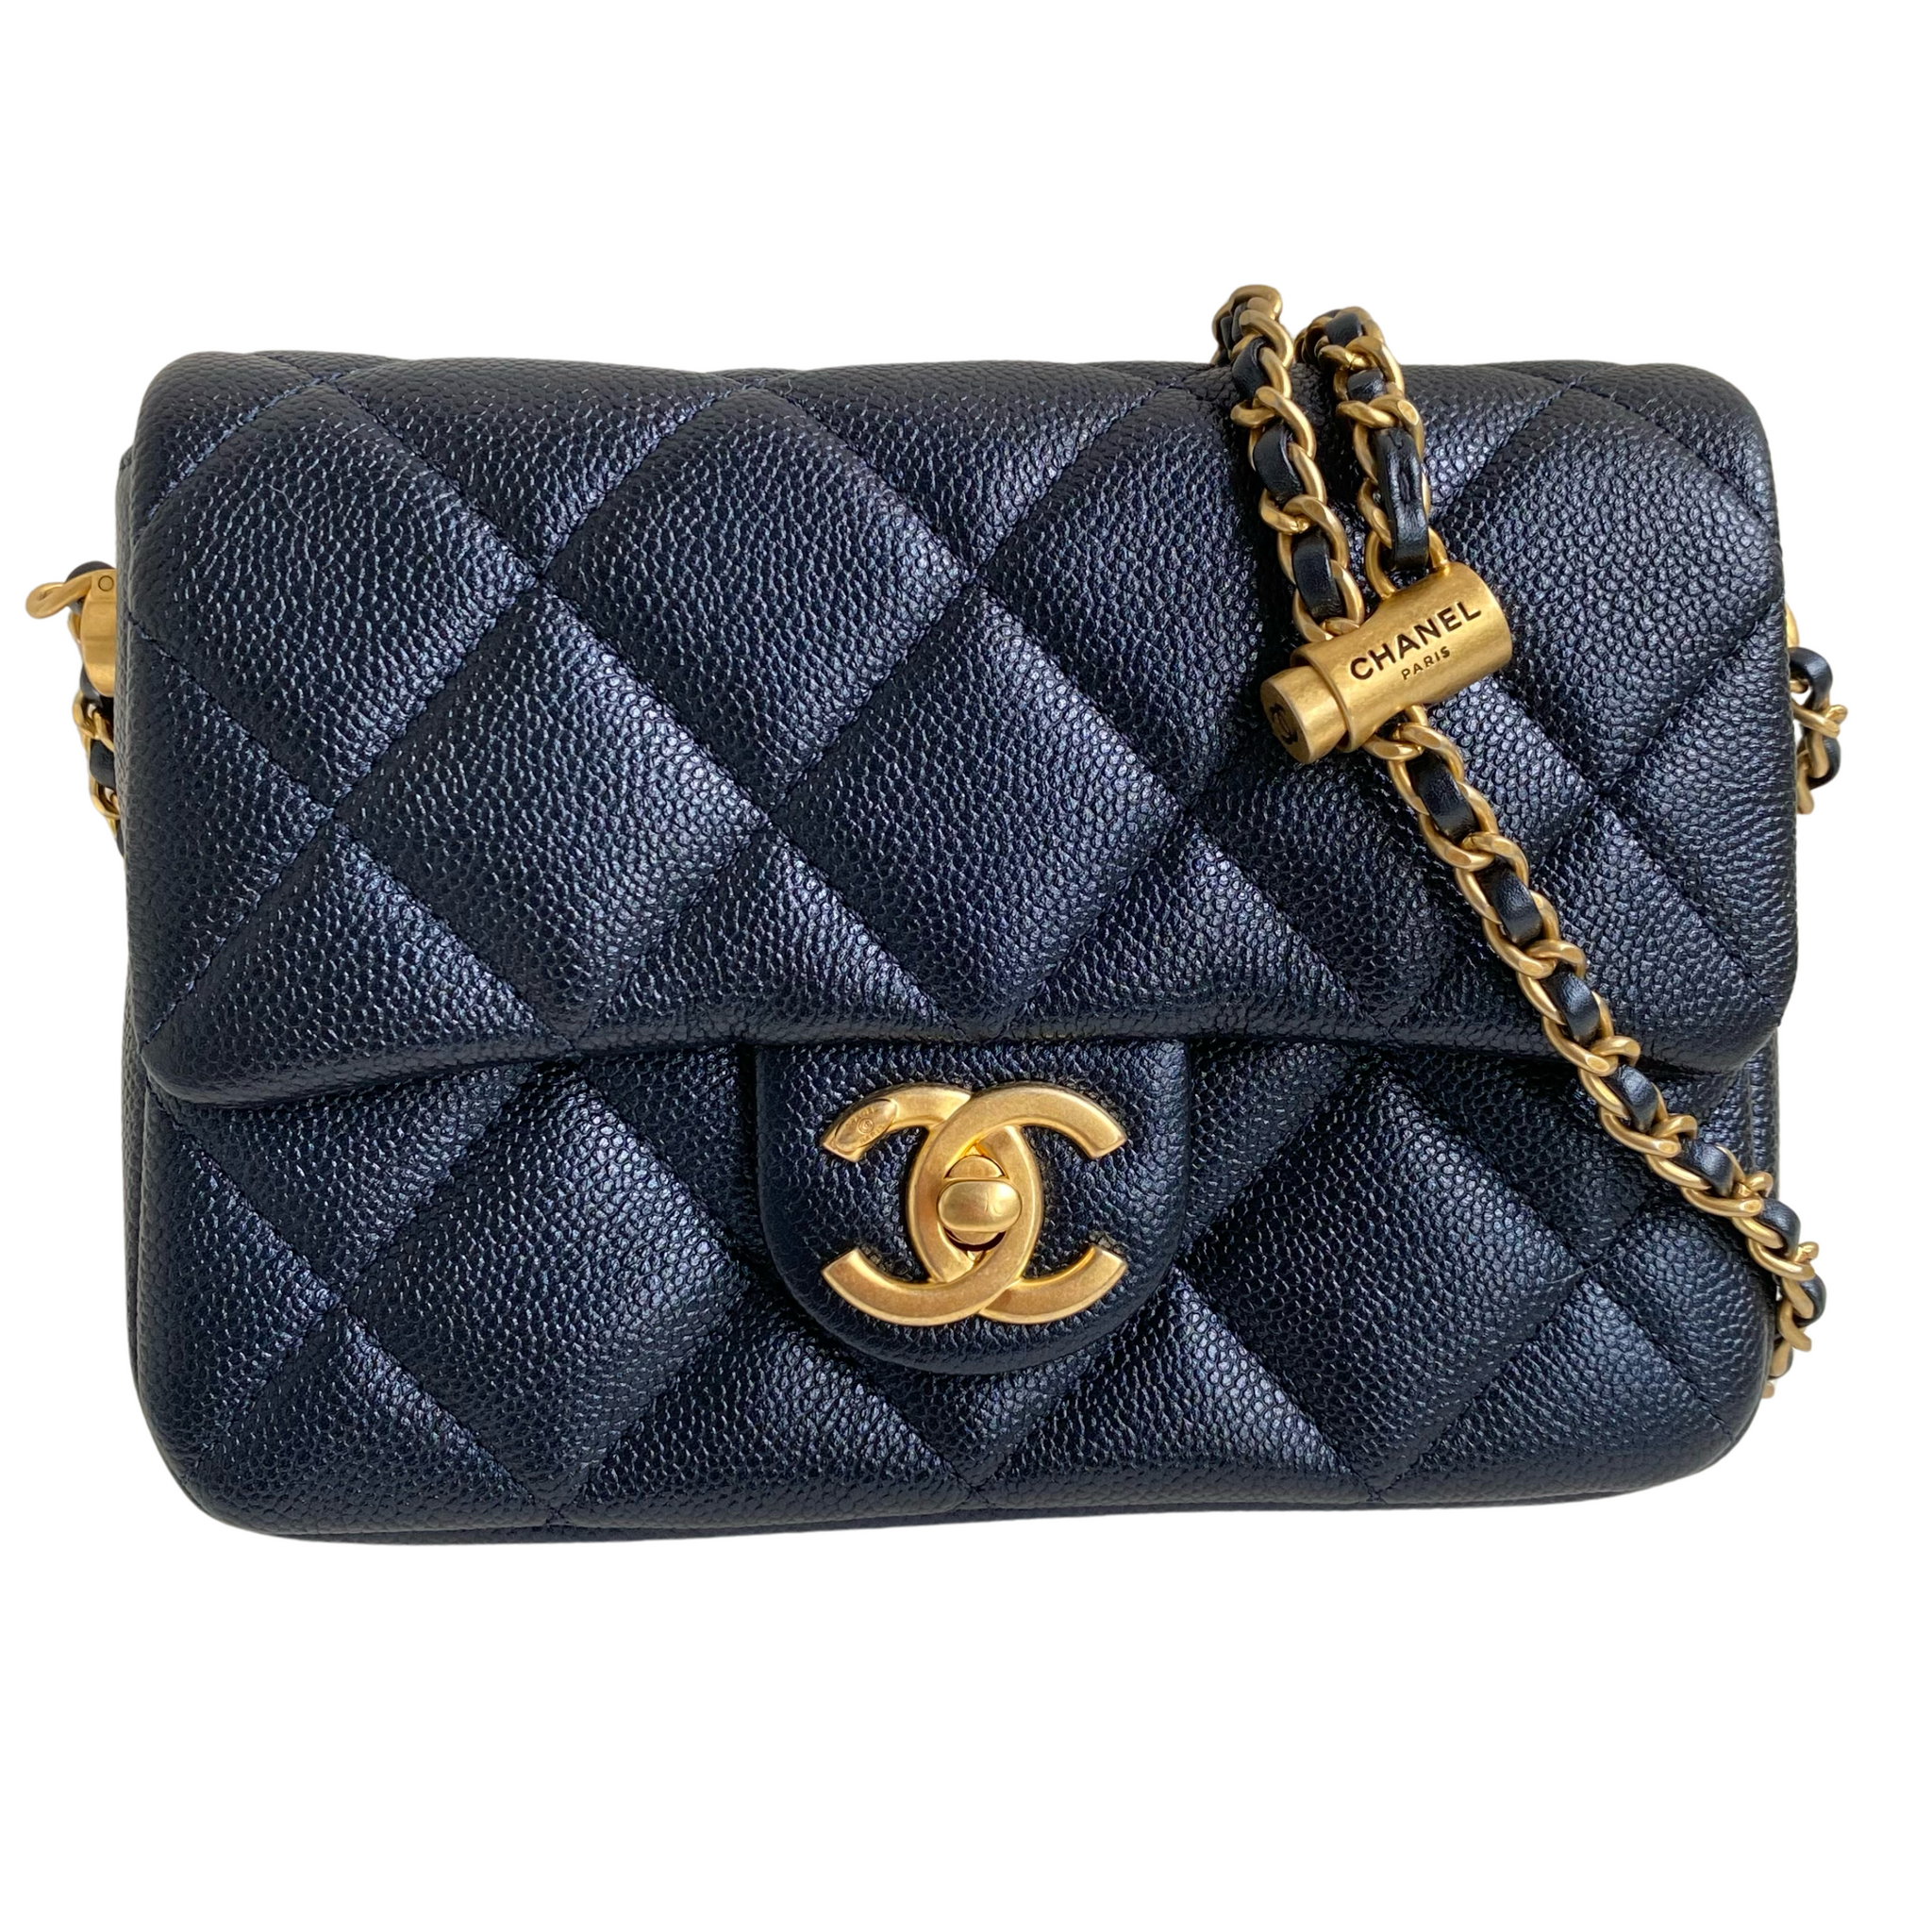 CHANEL My Perfect Mini Flap Bag in Iridescent Black Dearluxe